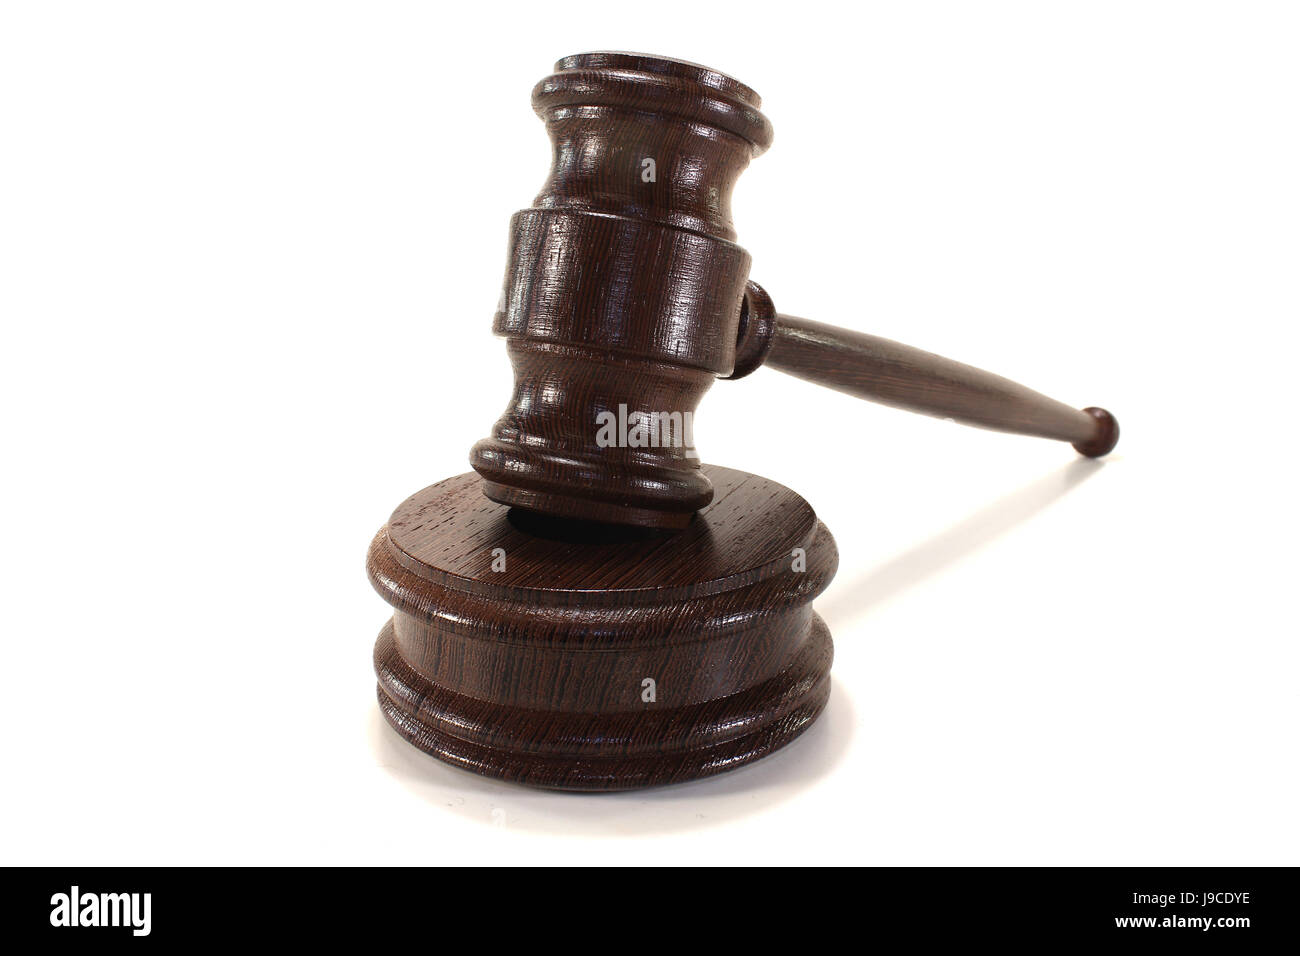 justice, auction, purchase by auction, law, court, punishment, law, justice, Stock Photo